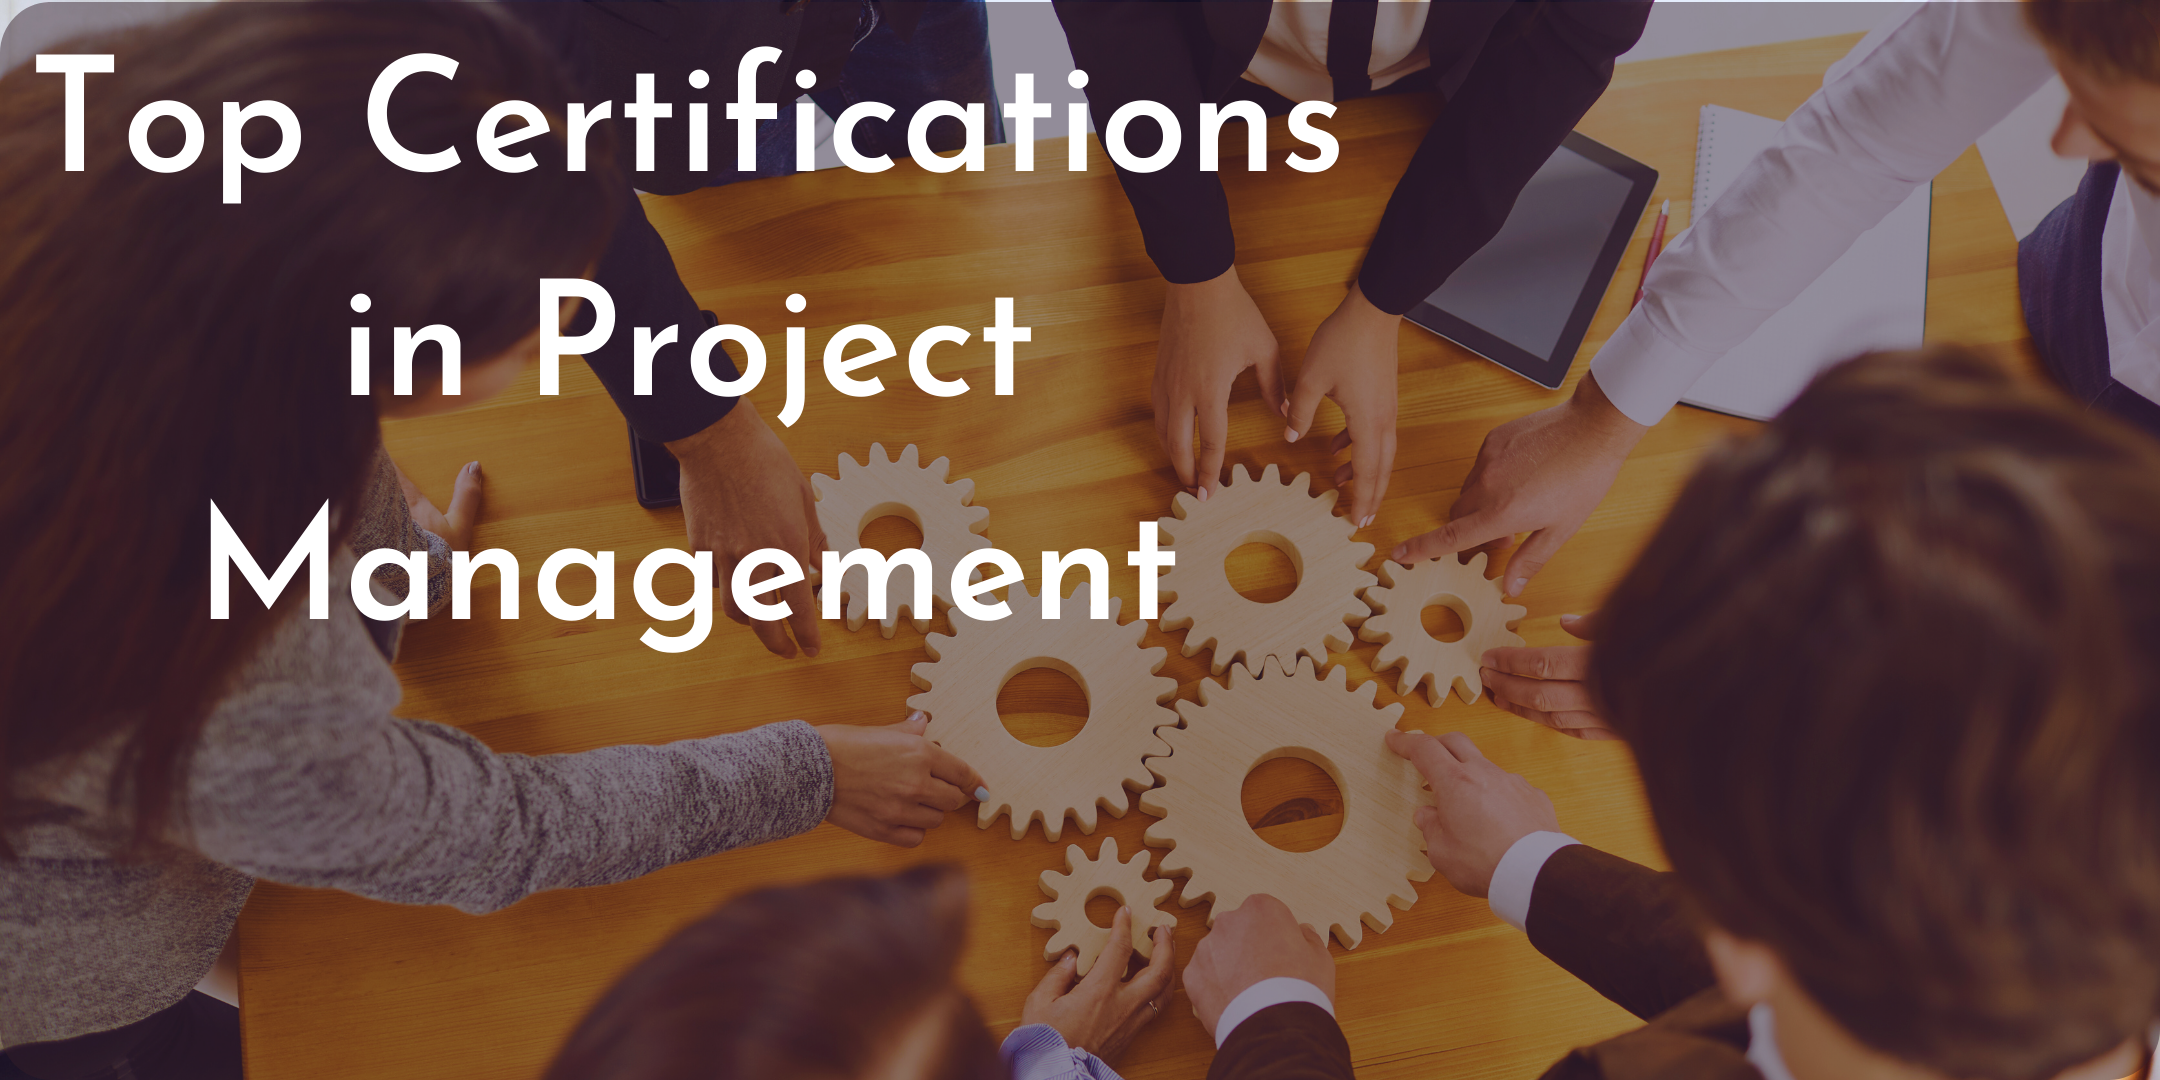 Project Management training guide